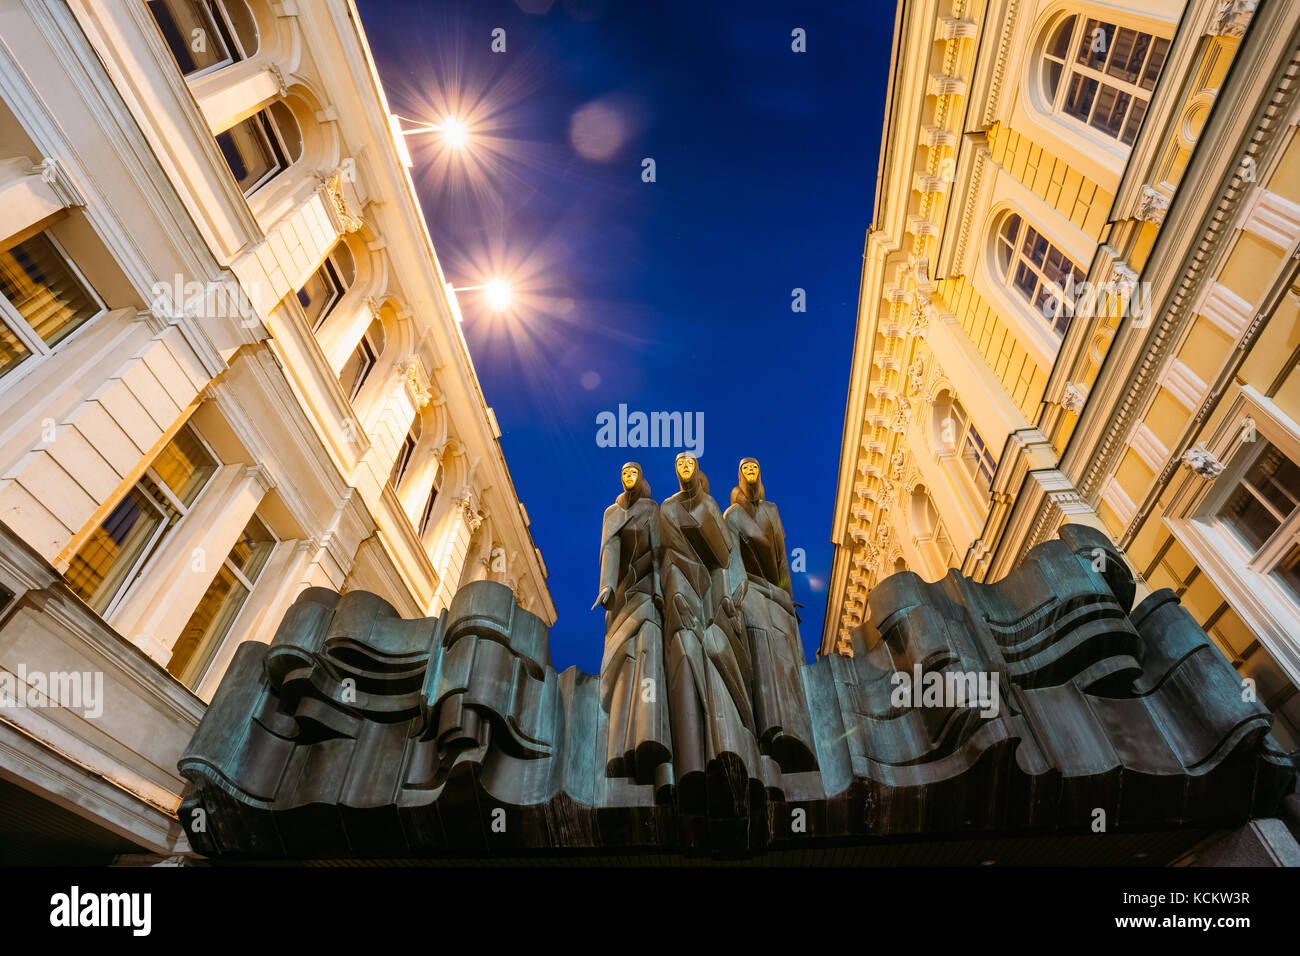 Vilnius, Lithuania - July 8, 2016: Close The Black Sculpture Of Three Muses On Facade Of Lithuanian National Drama Theatre Building, Main Entrance, Bl Stock Photo